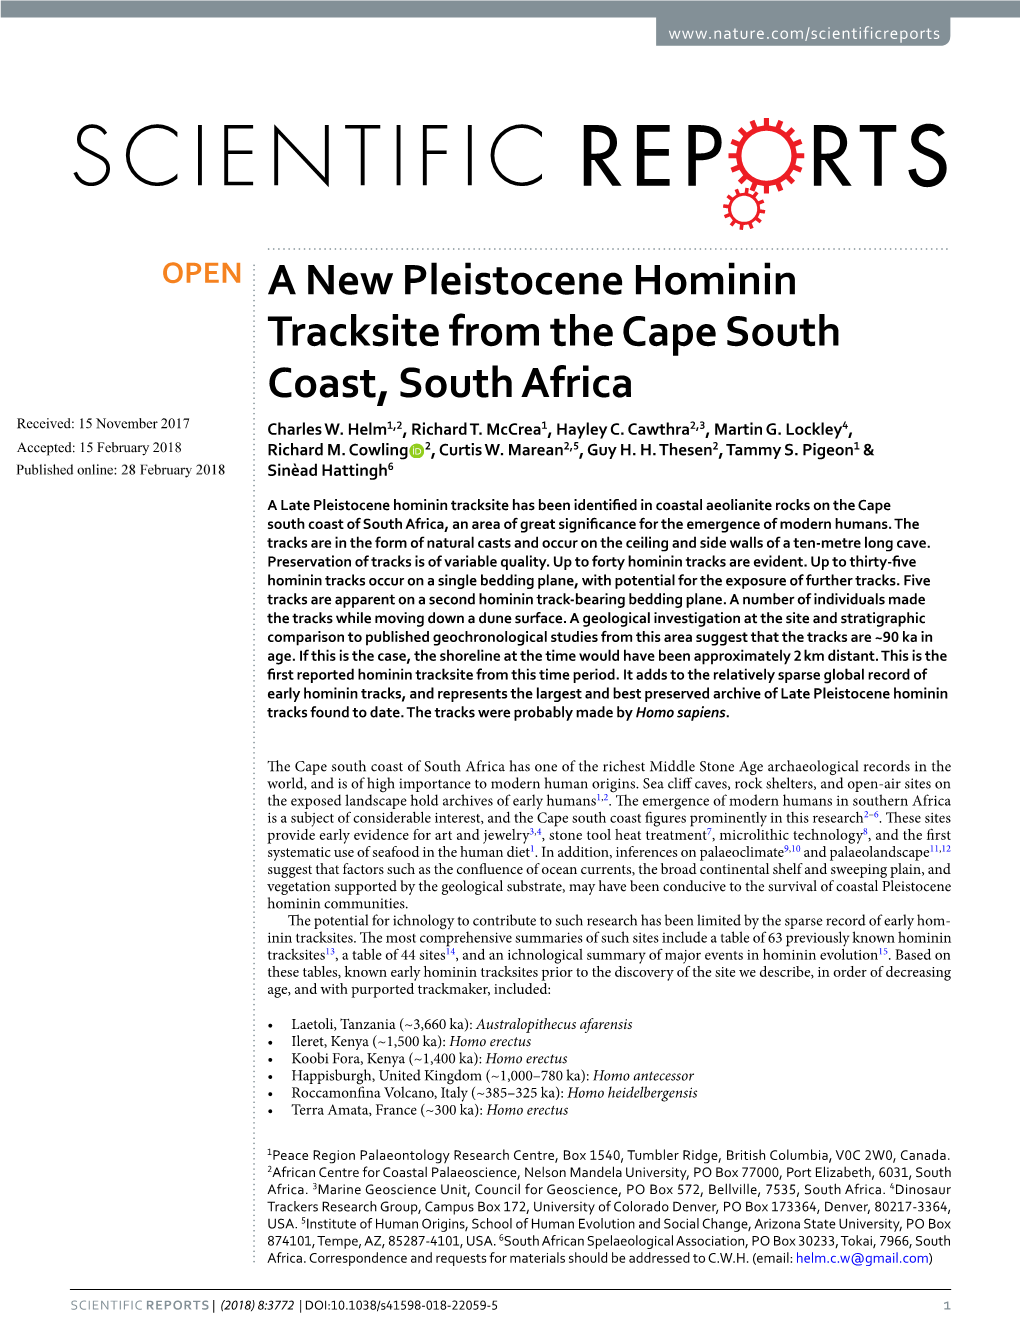 A New Pleistocene Hominin Tracksite from the Cape South Coast, South Africa Received: 15 November 2017 Charles W